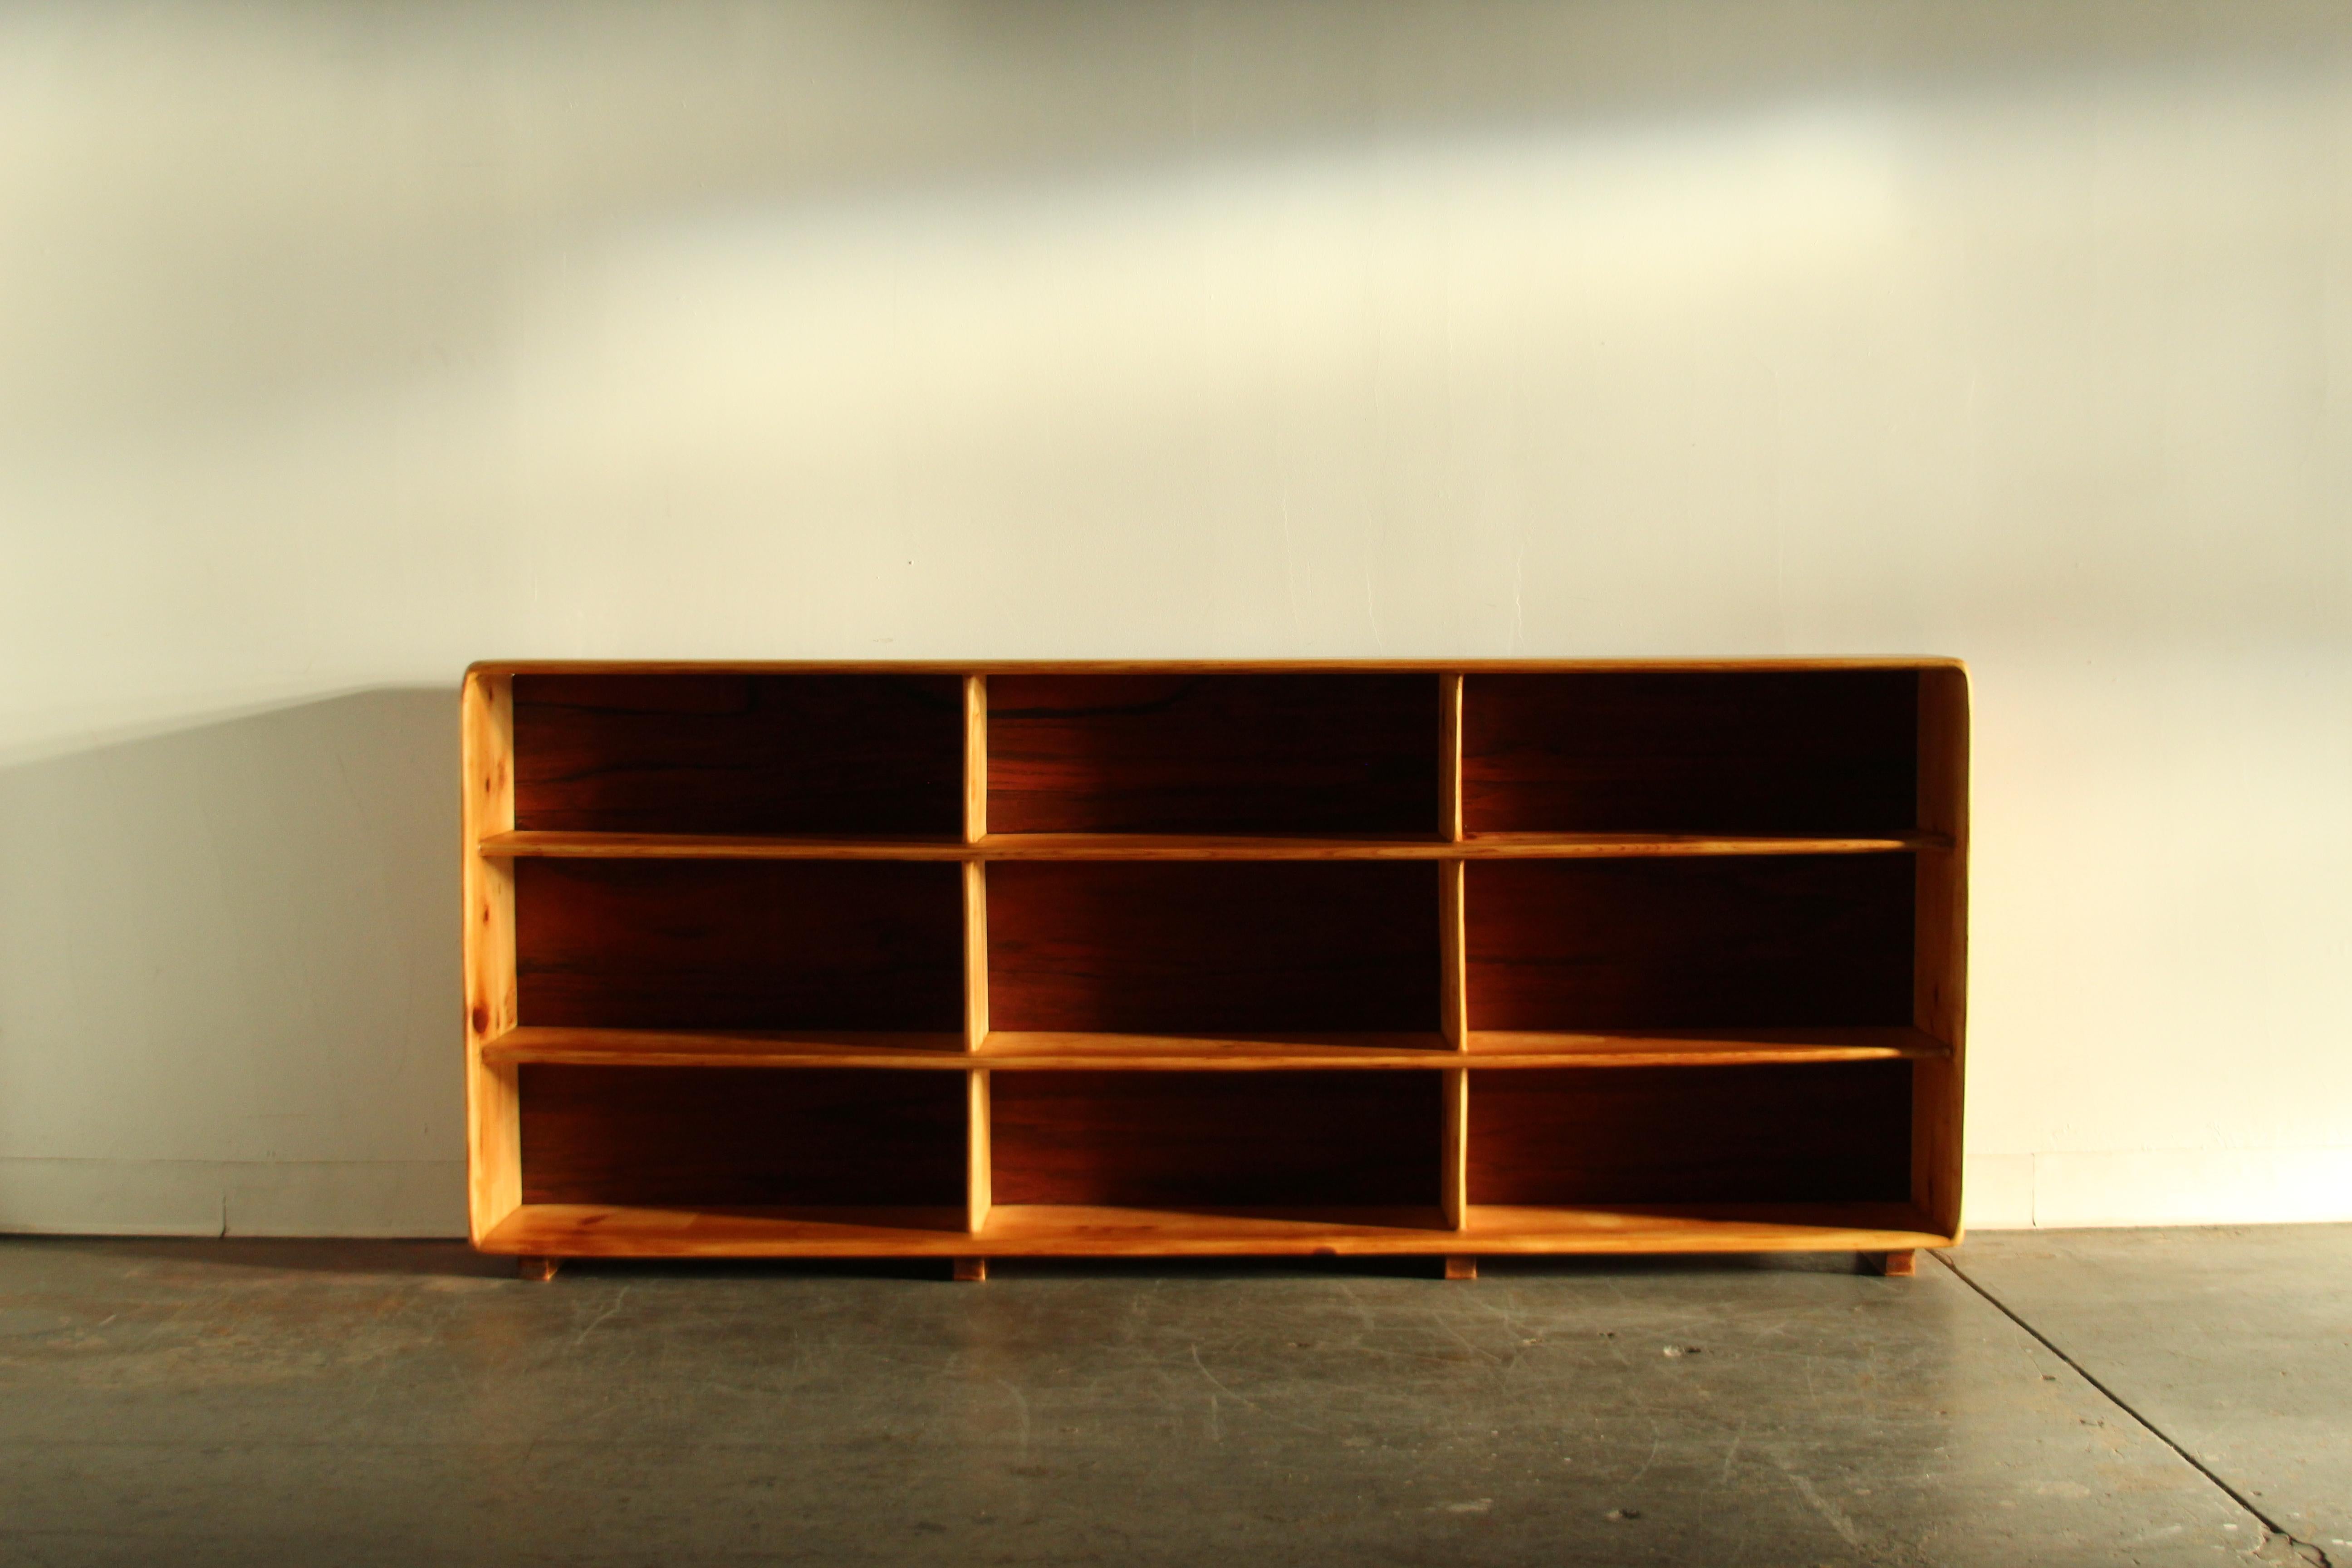 An amazing California studio crafted bookcase constructed in solid pine with rosewood veneer backing, most likely made in the the 1970s. Every corner and edge has been sculpted to create an organic, sinuous aesthetic. The piece has an incredible